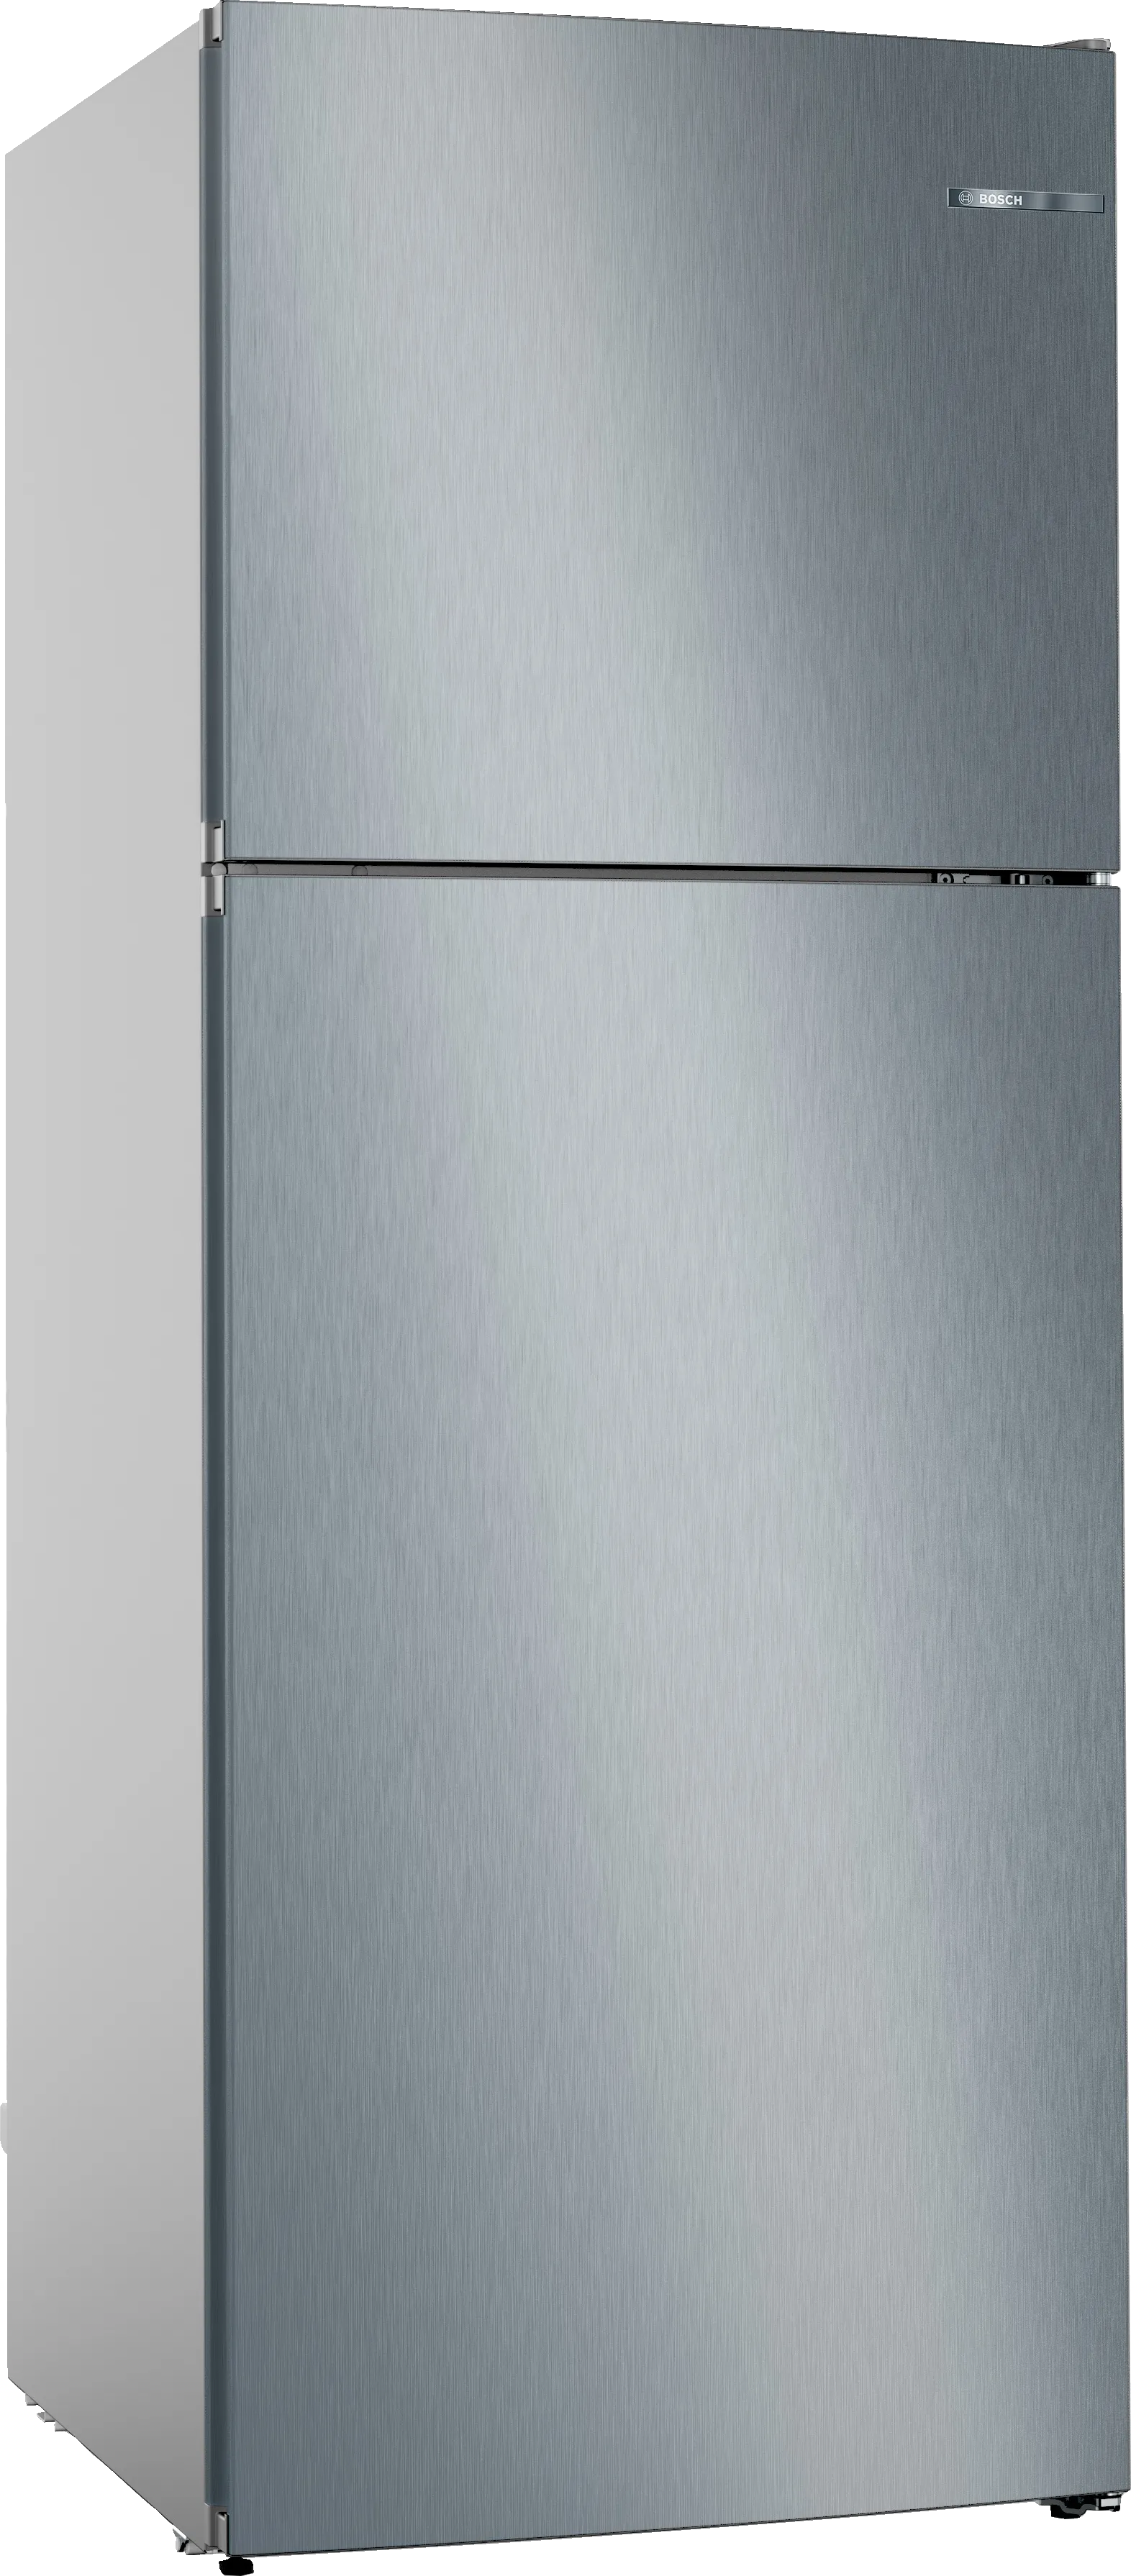 Series 4 free-standing fridge-freezer with freezer at top 186 x 70 cm Stainless steel look 